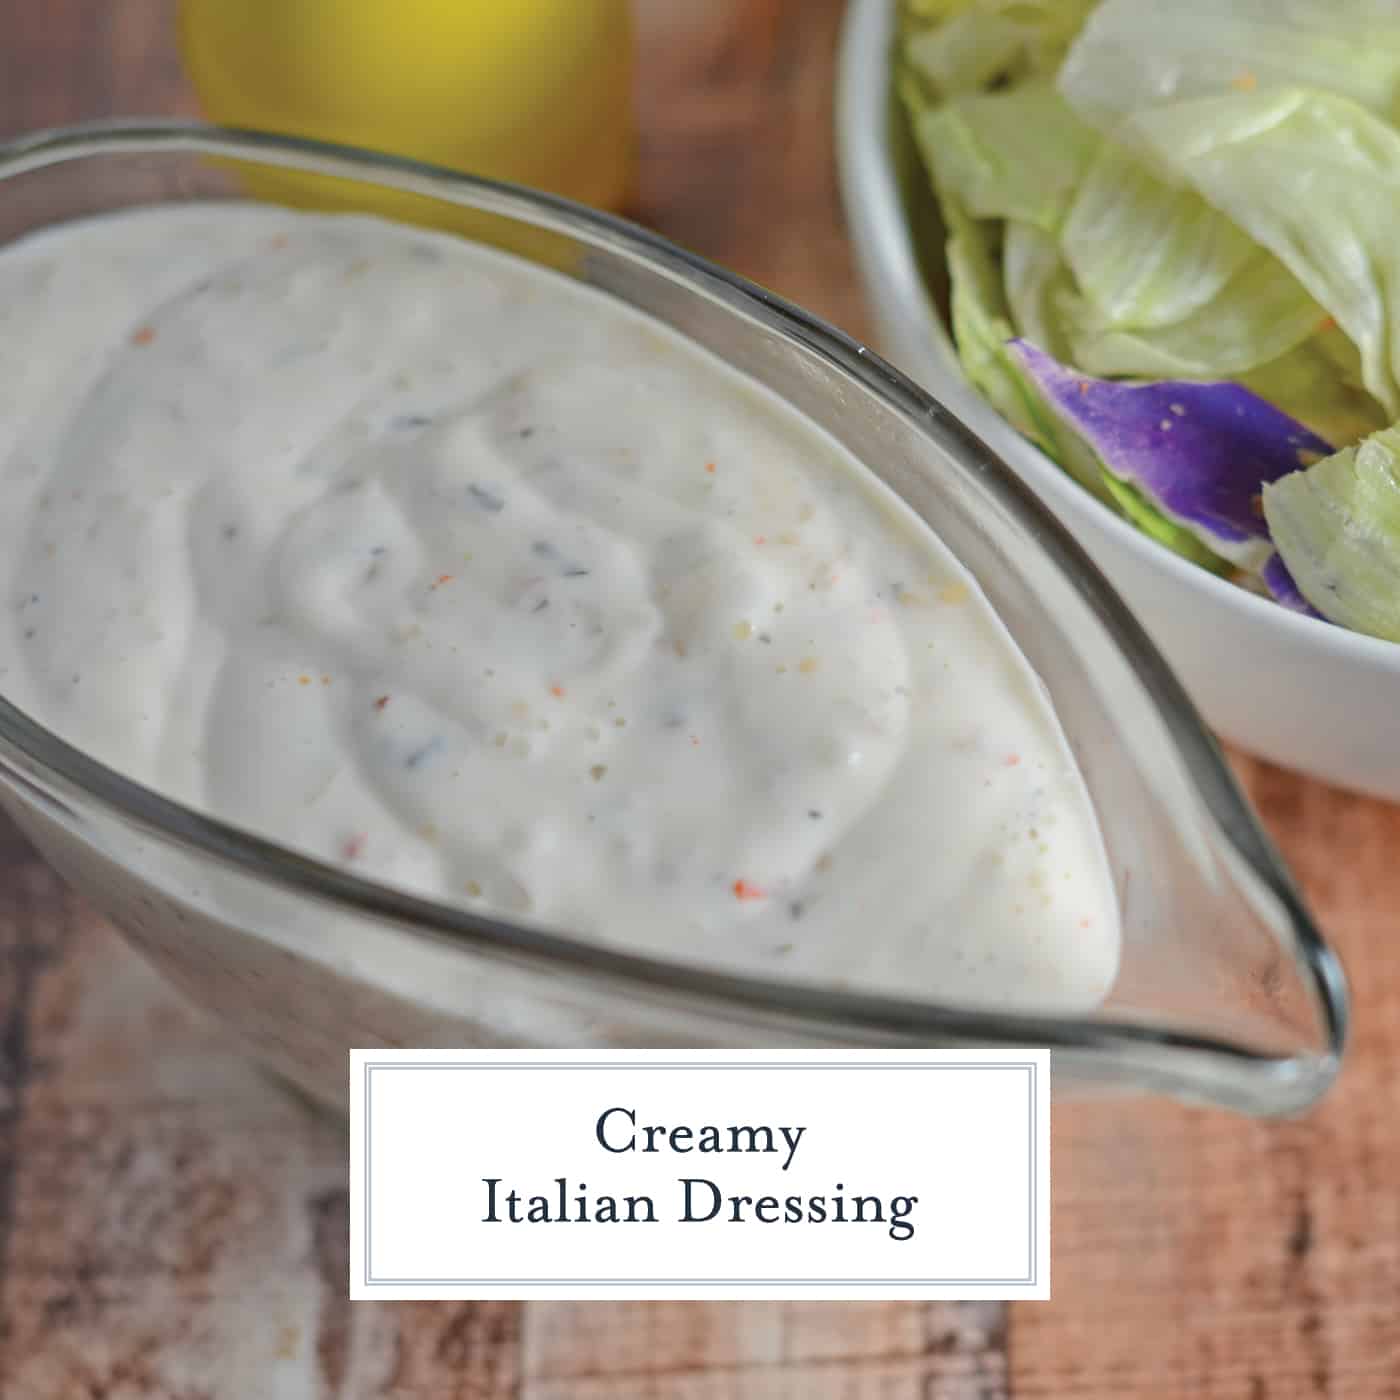  Creamy Italian Dressing a creamy, zesty Italian dressing that you will fall in love with. In 10 minutes or less you can have a homemade Italian dressing. #homemadeitaliandressing #creamyitaliandressing #italiandressingrecipe www.savoryexperiments.com 